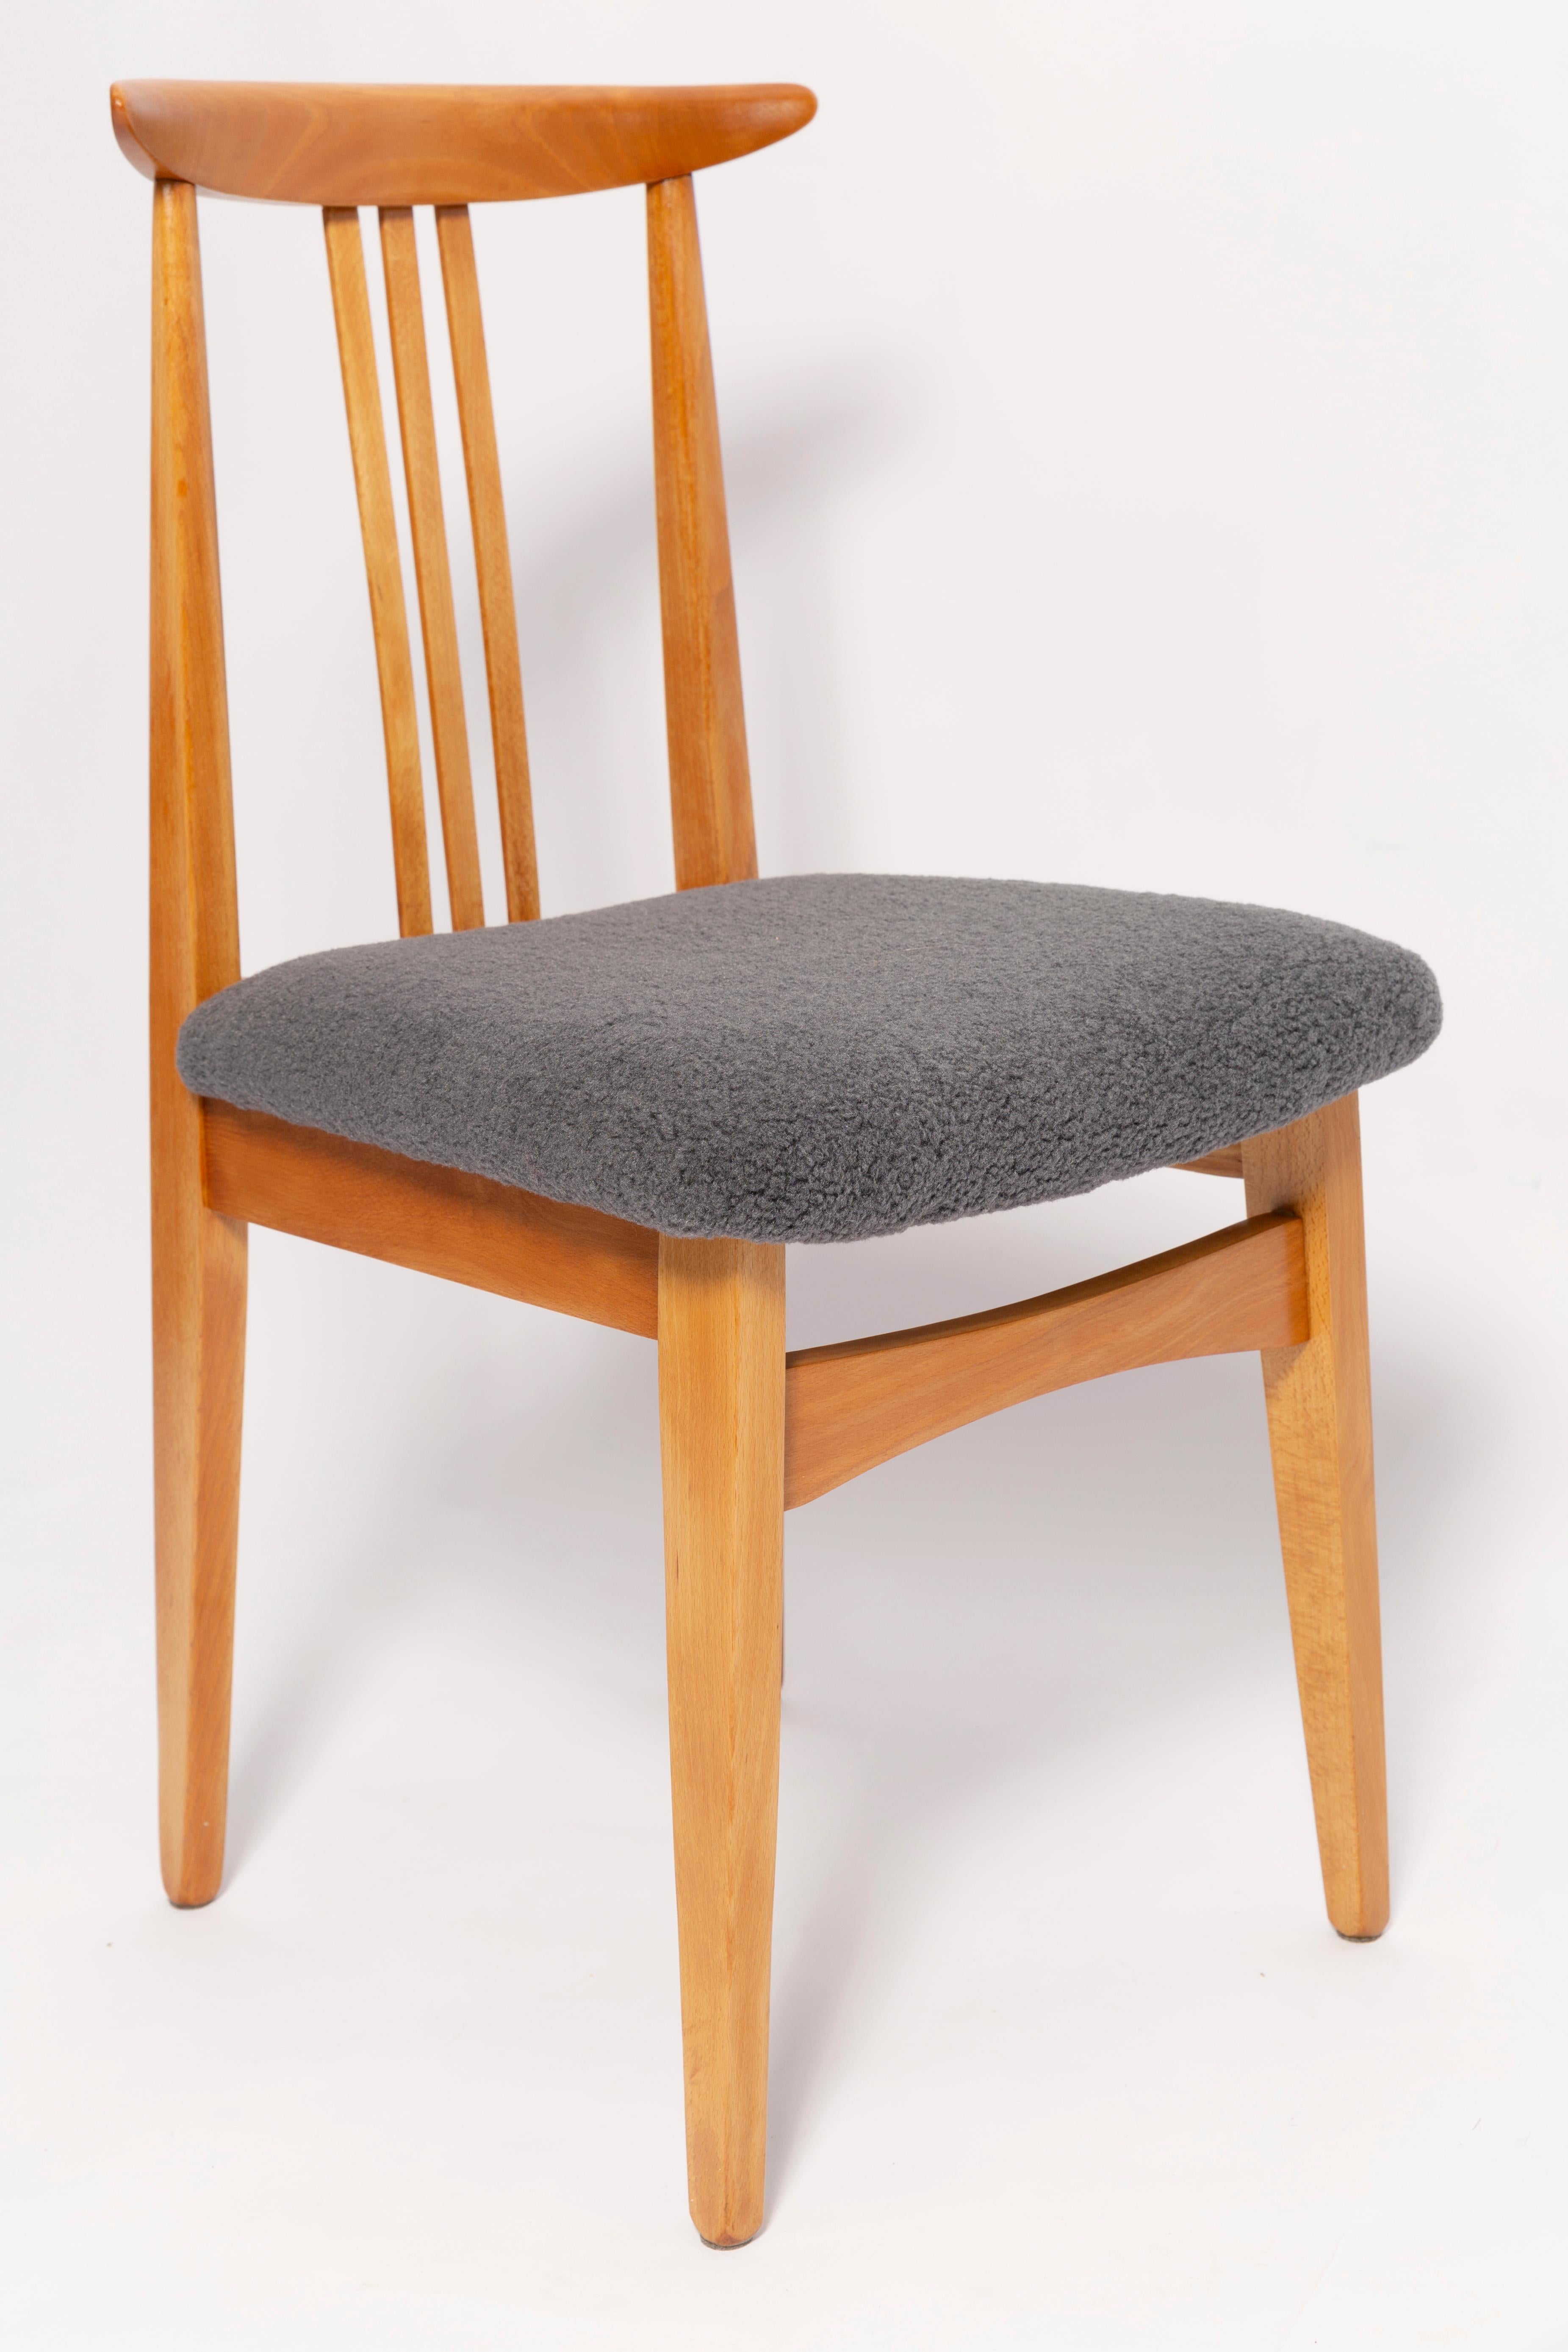 Mid-Century Graphite Gray Boucle Chair, Light Wood, M. Zielinski, Europe, 1960 For Sale 2